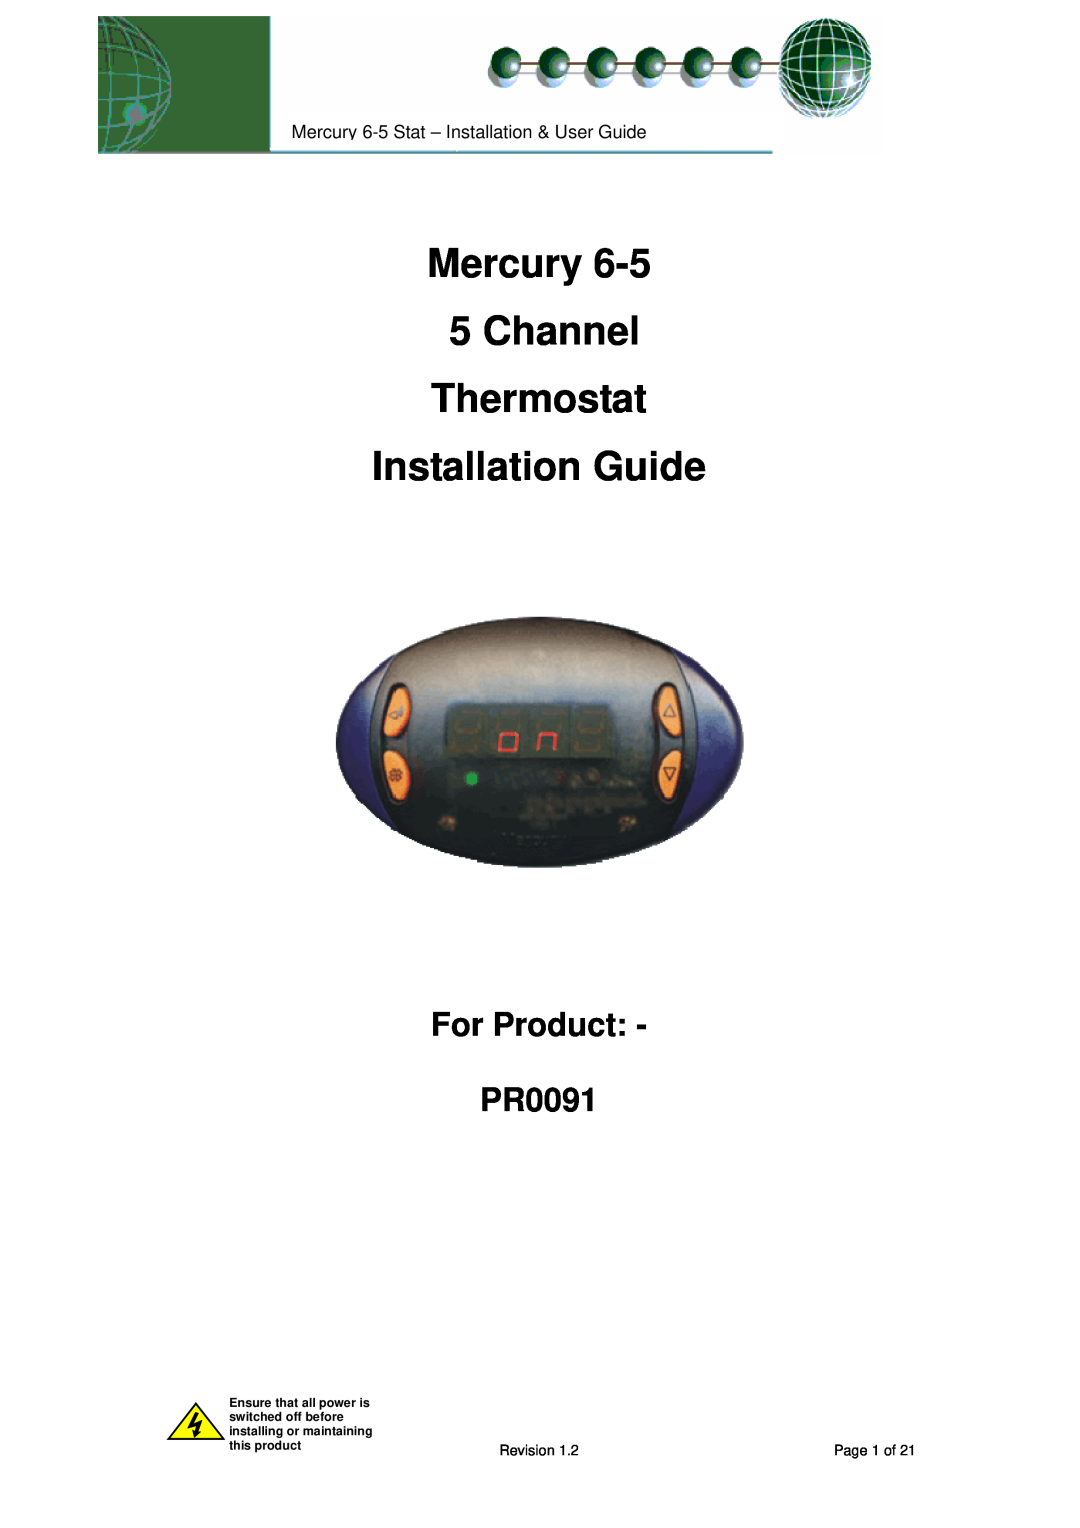 Mercury manual Mercury 5Channel Thermostat Installation Guide, For Product PR0091, Revision, Page 1 of, this product 